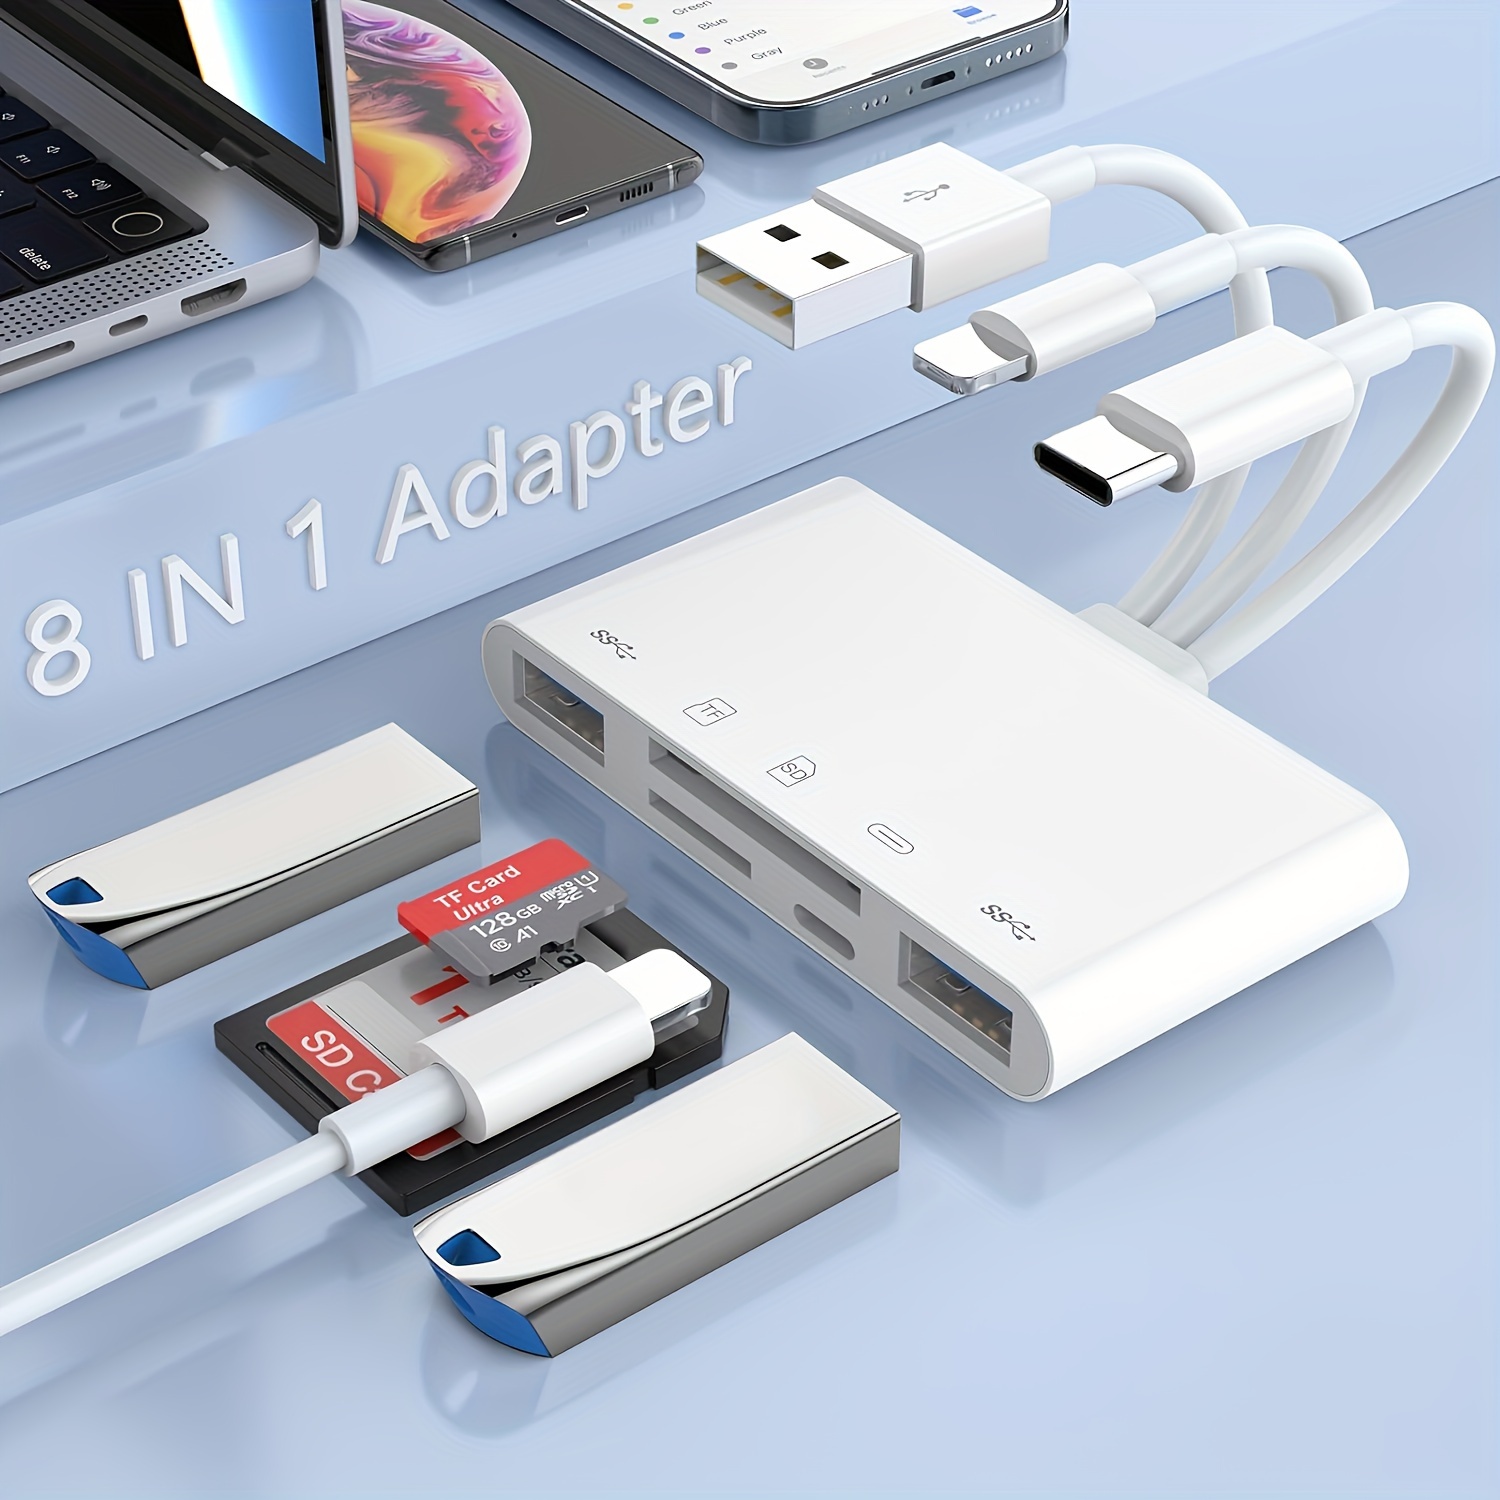 5-in-1 Memory Card Reader, USB OTG Adapter & SD Card Reader for  i-Phone/i-Pad, USB C and USB A Devices with Micro SD & SD Card Slots,  Supports